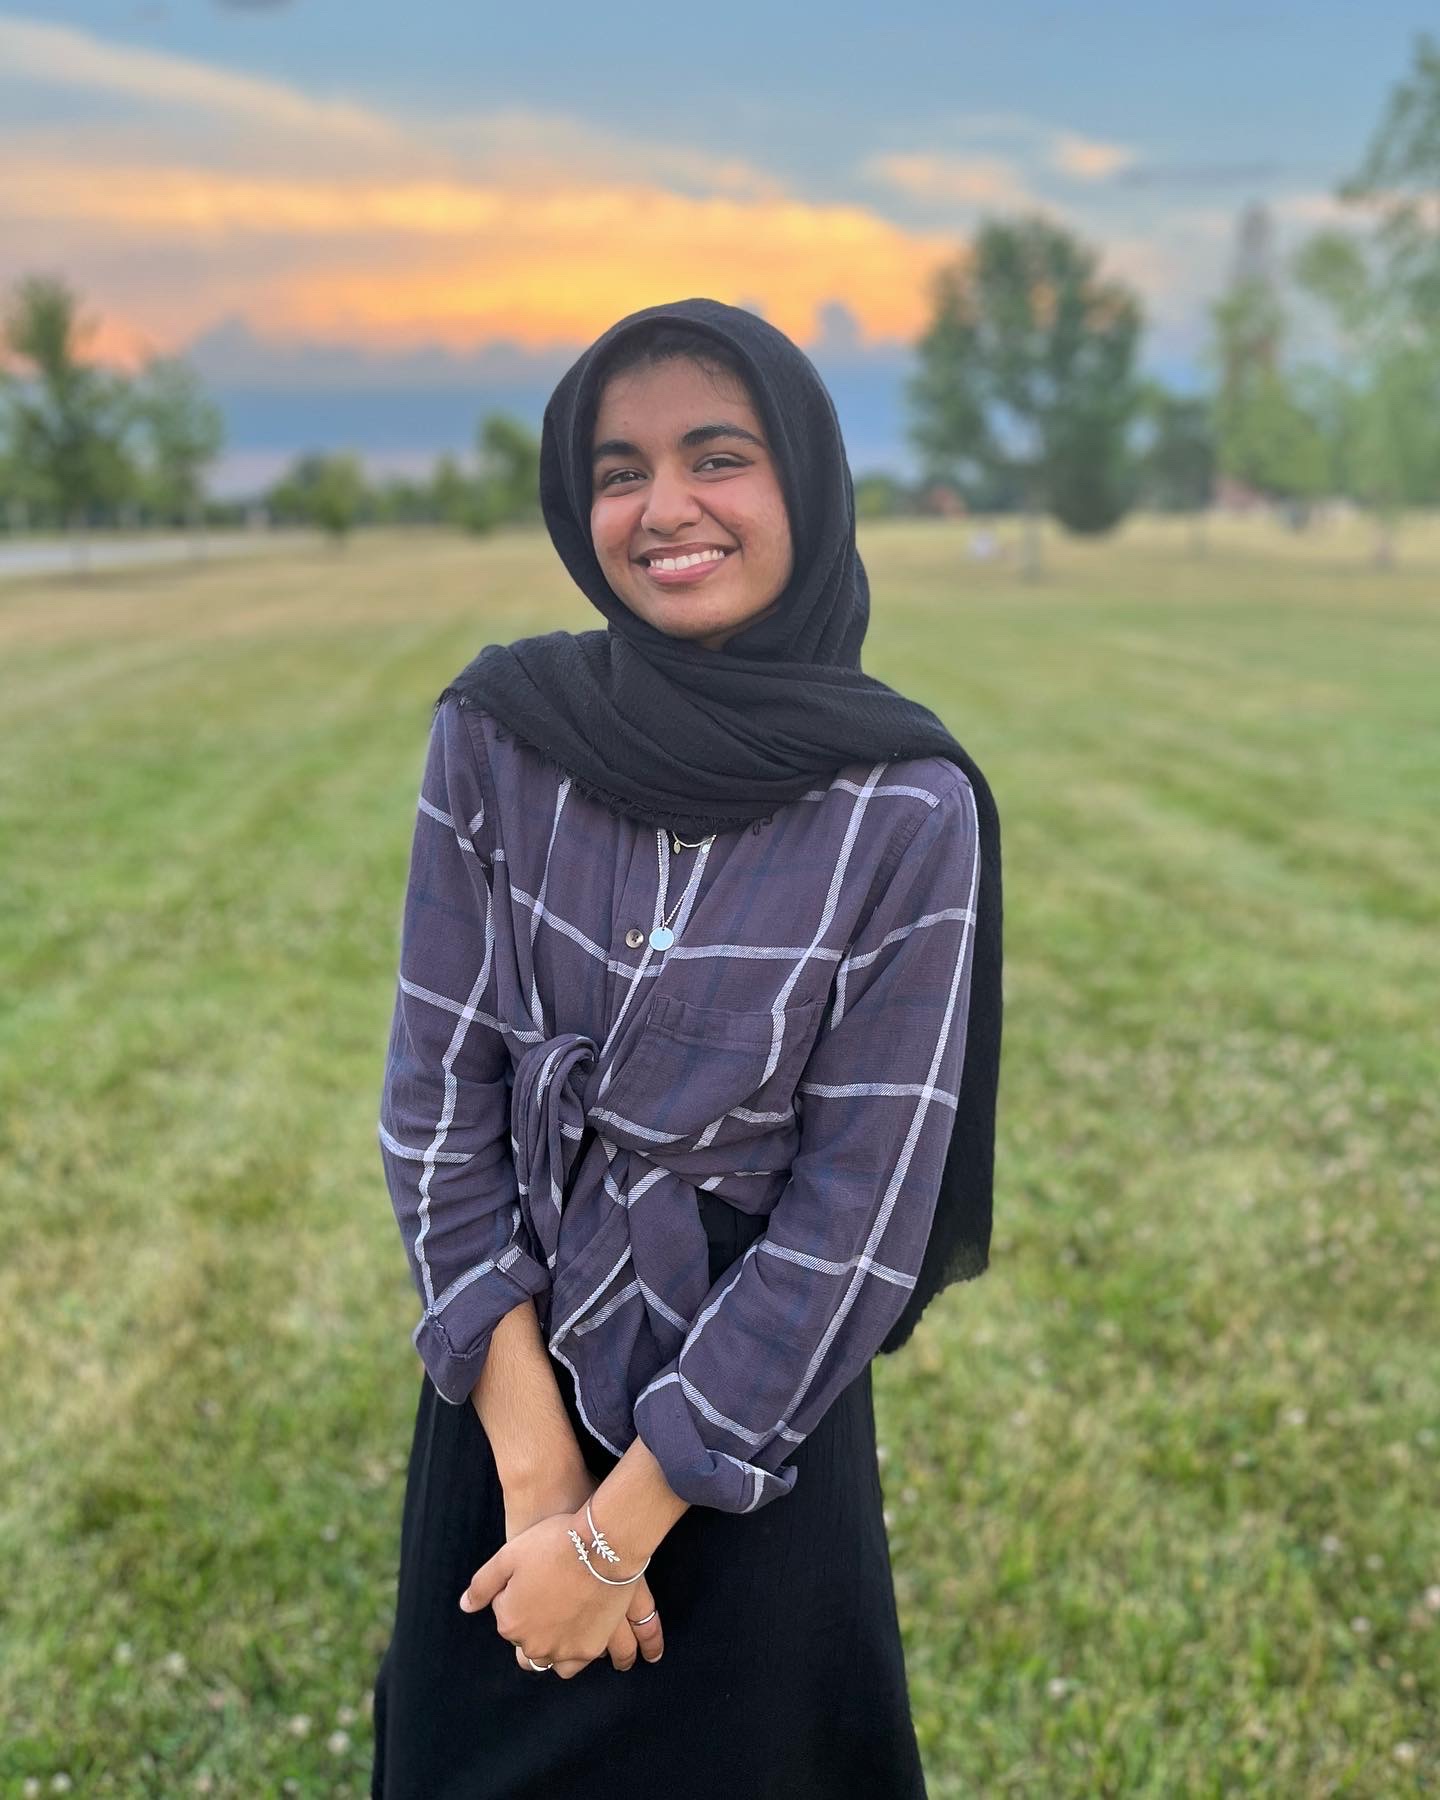 A female student stands outside in a field smiling